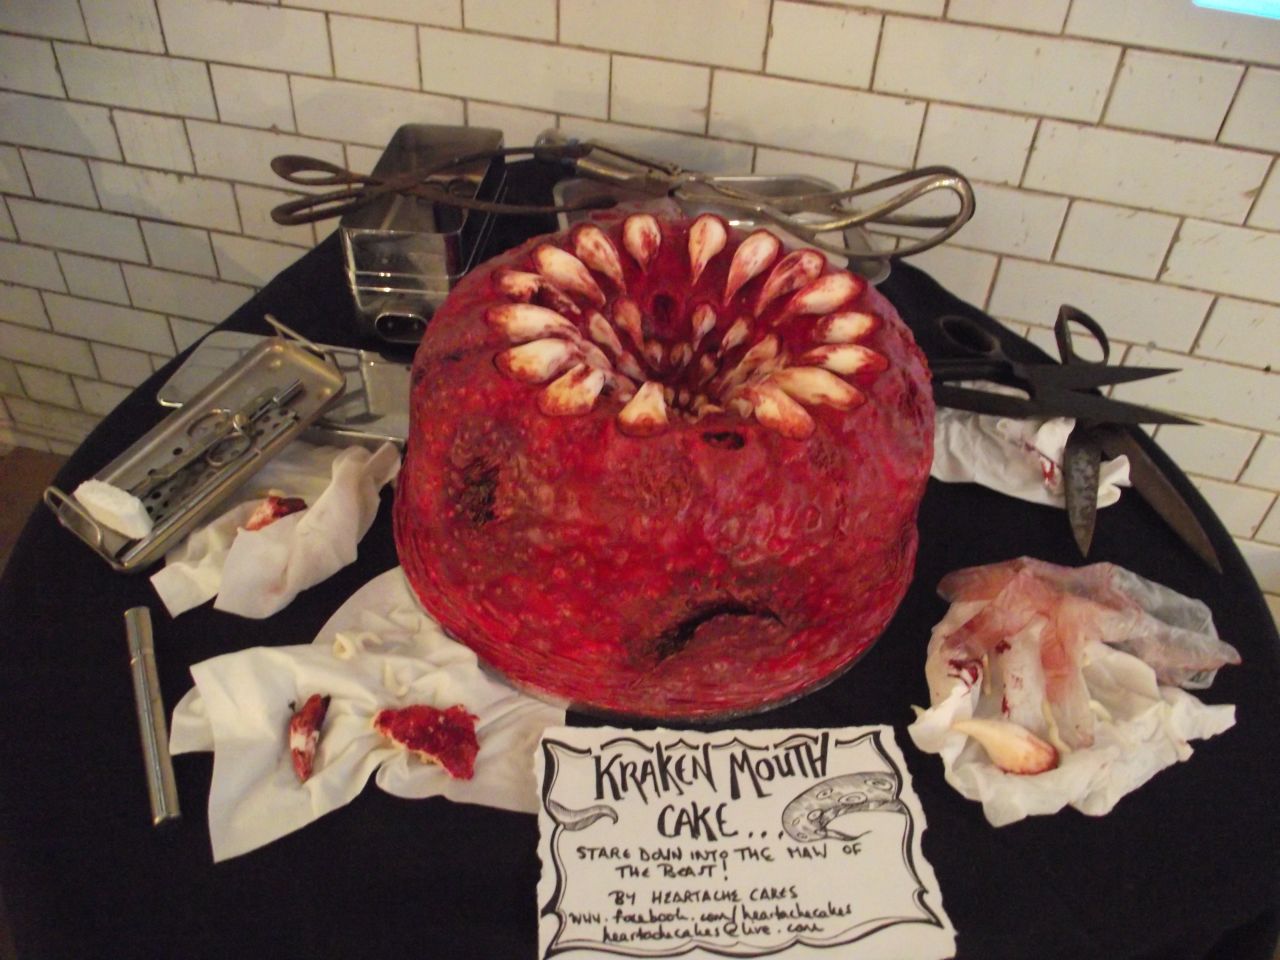 Gaze into the Kraken's mouth. This cake is actually a spiced cake with cinnamon and nutmeg made by <a href="https://www.facebook.com/HeartacheCakes" target="_blank" target="_blank">Heartache Cakes</a>.